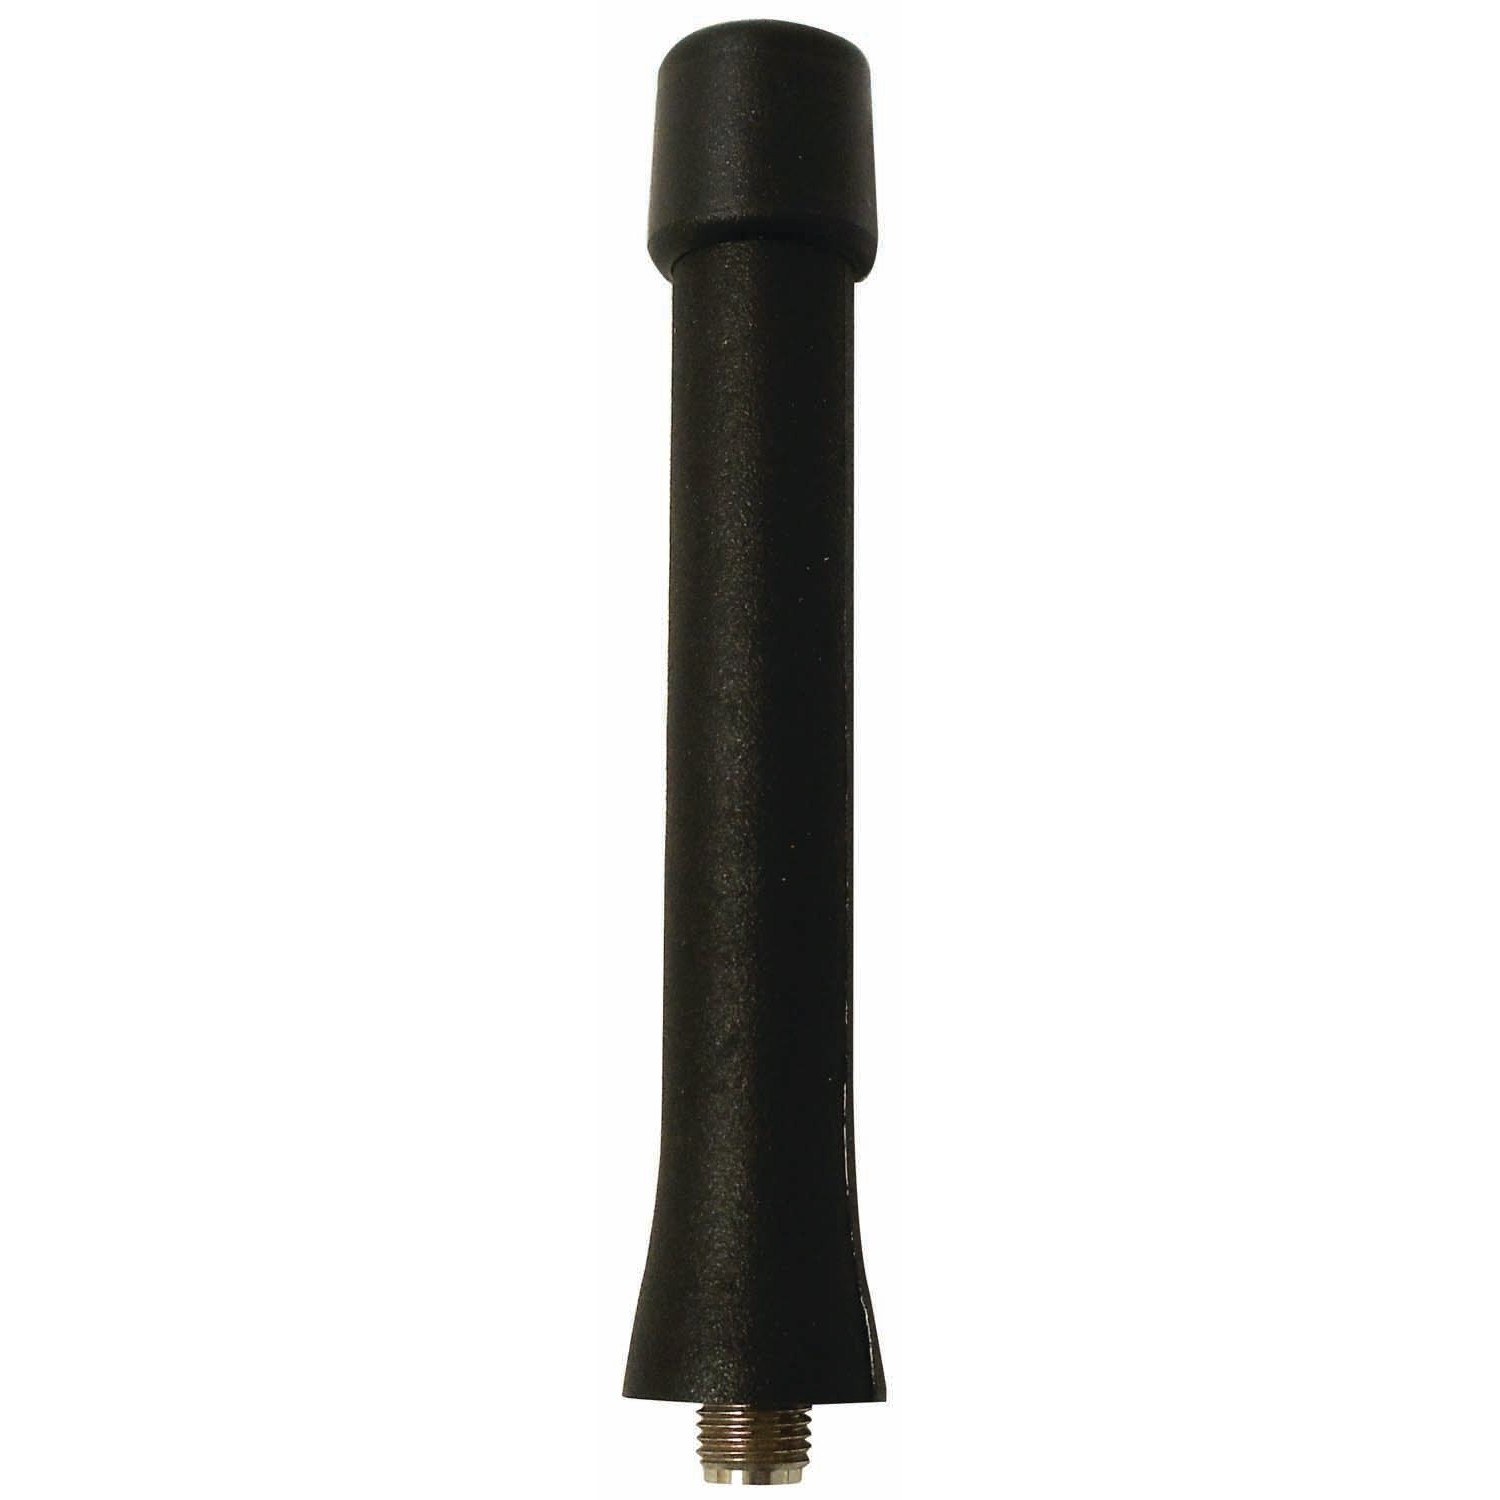 HELICAL SHORT 1/4 WAVE ANTENNA 462-498 MHZ